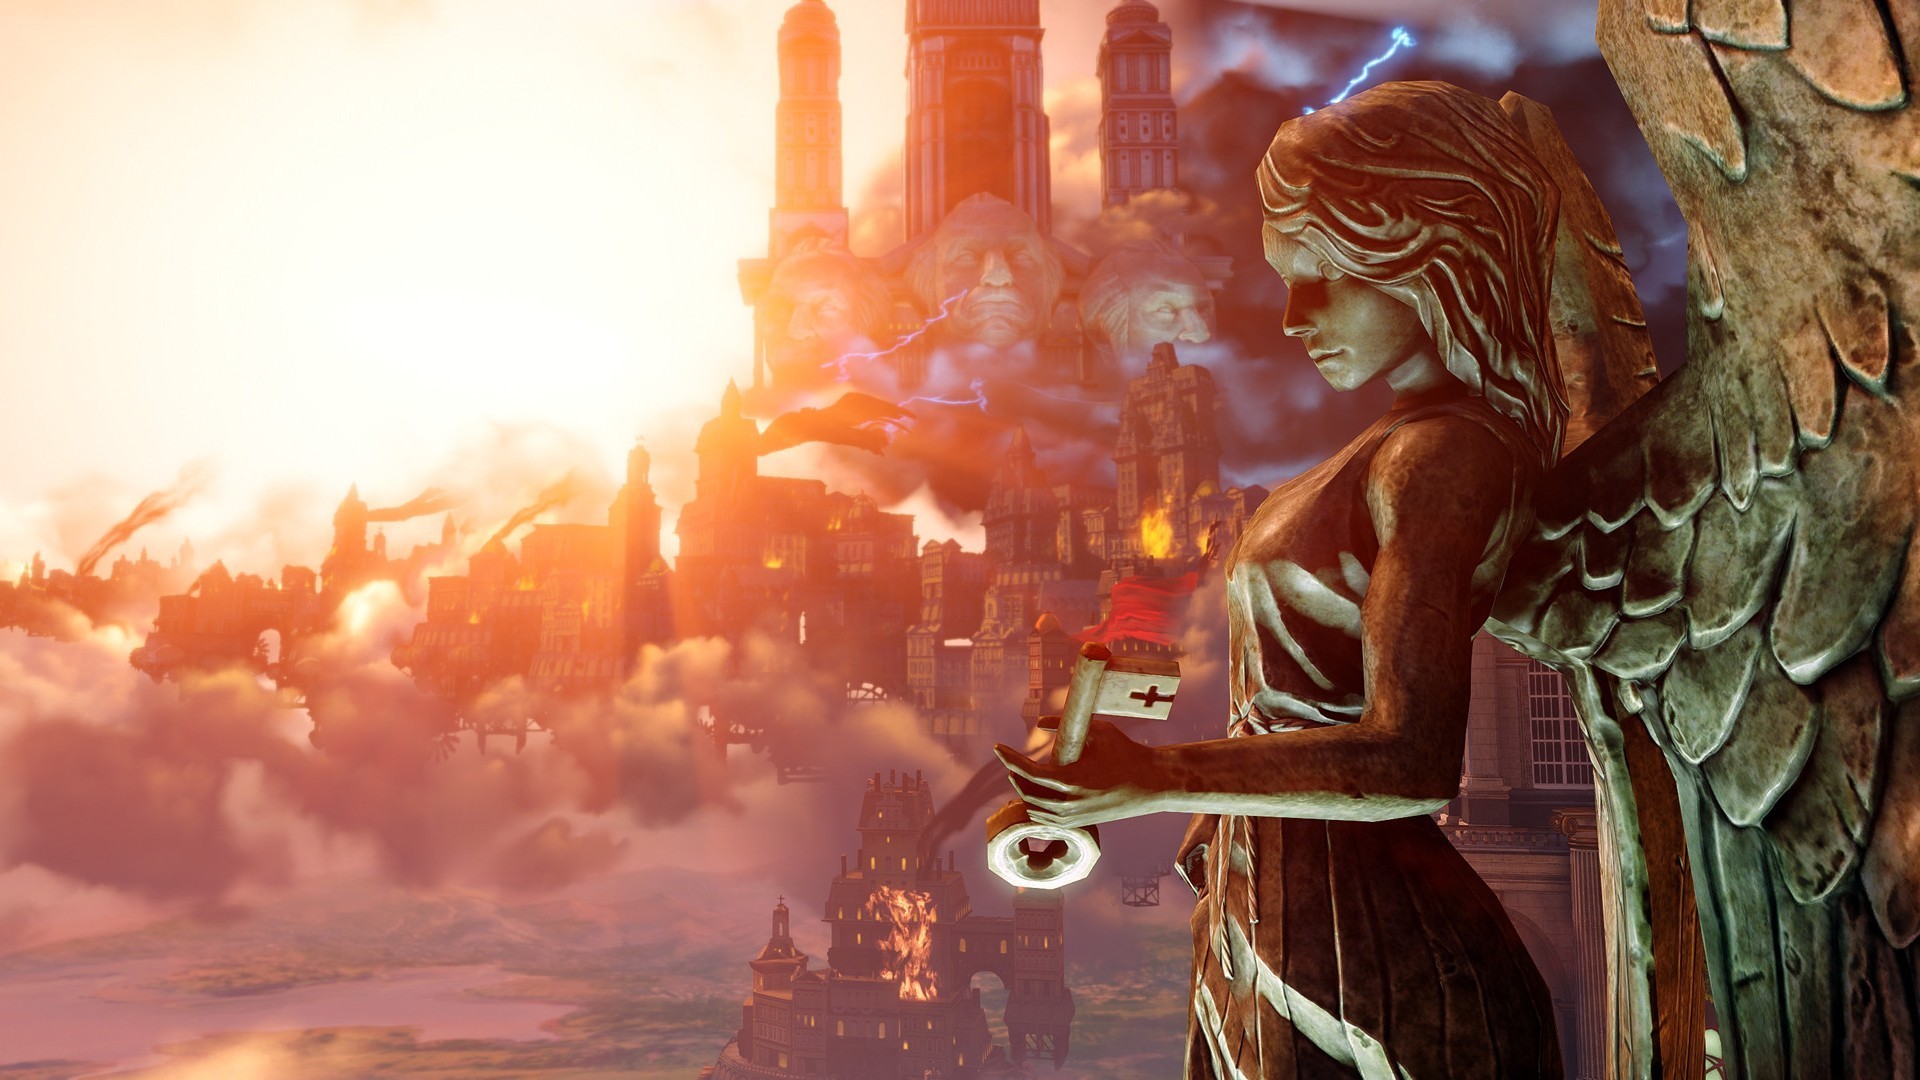 Bioshock Infinite Wallpaper Collection For Free Download